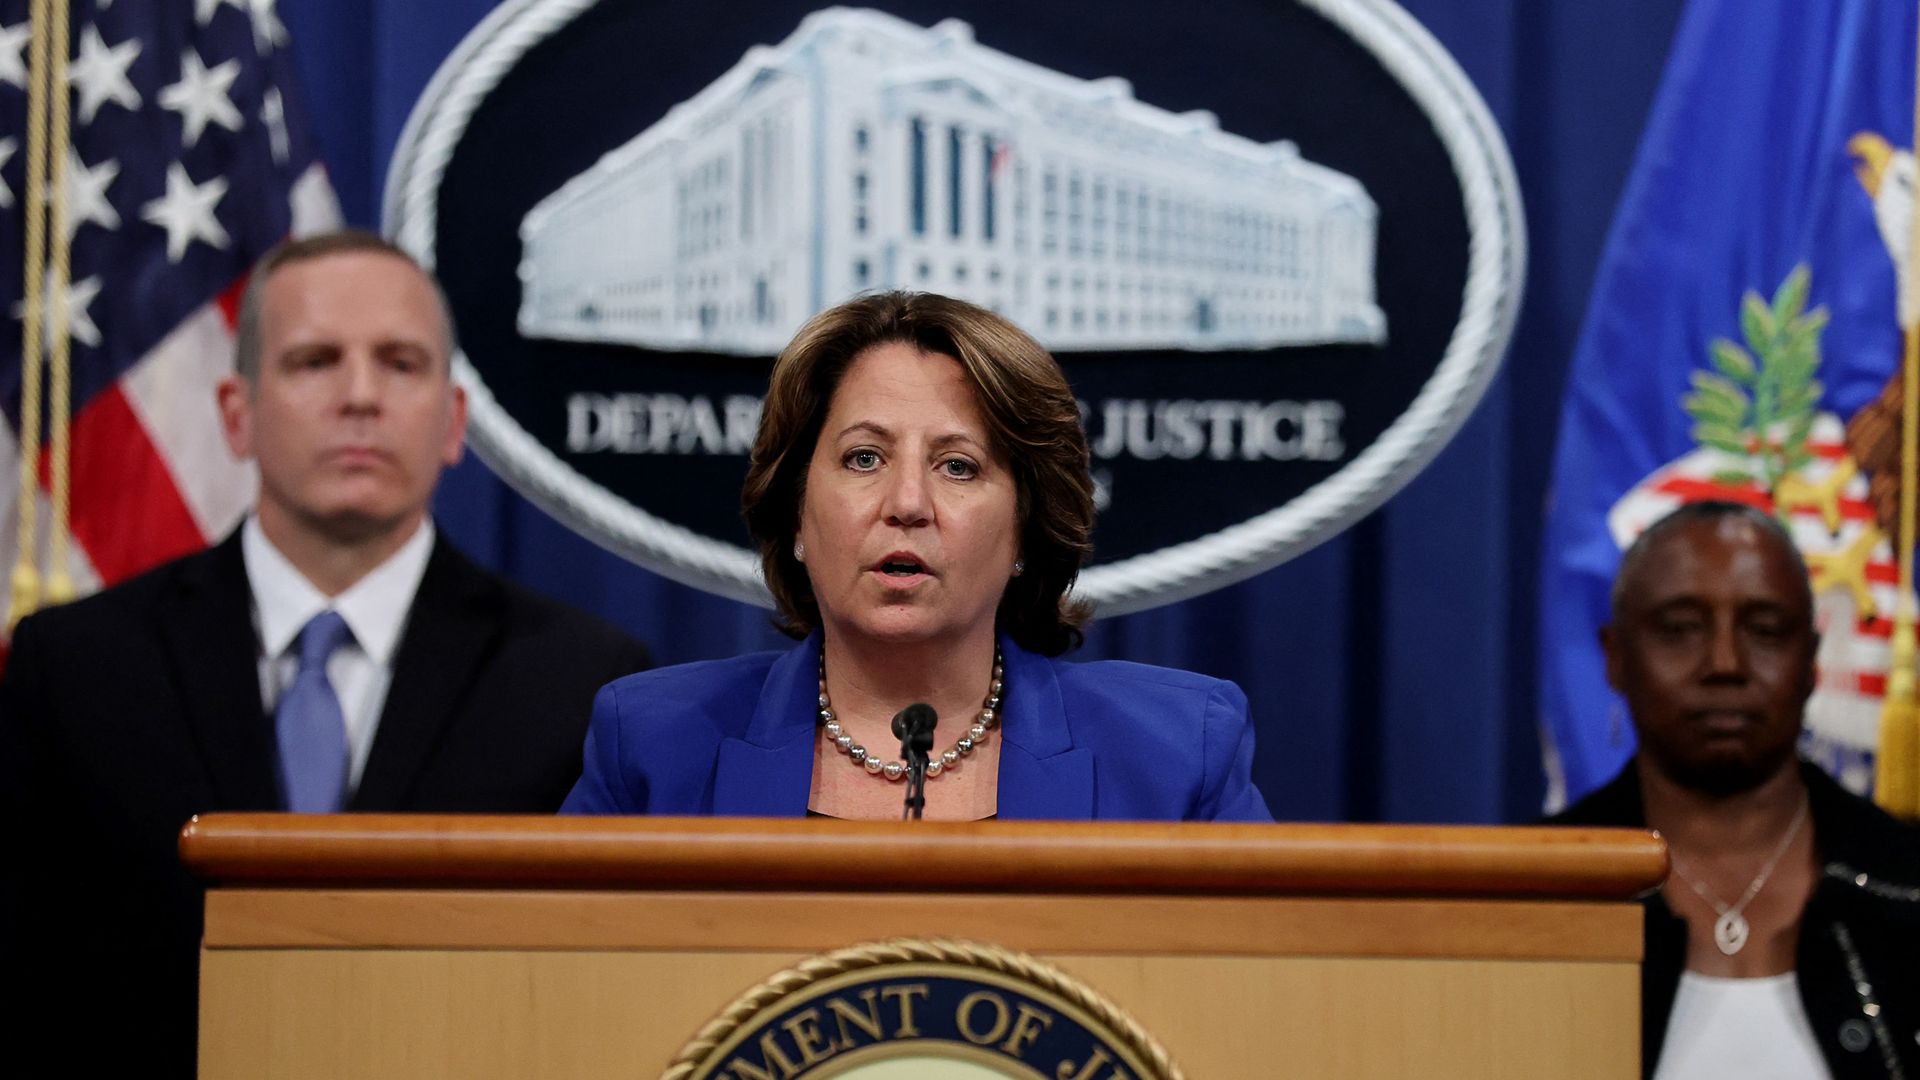 Deputy Attorney General Lisa Monaco is seen addressing a news conference about the Colonial Pipeline ransomware attack.